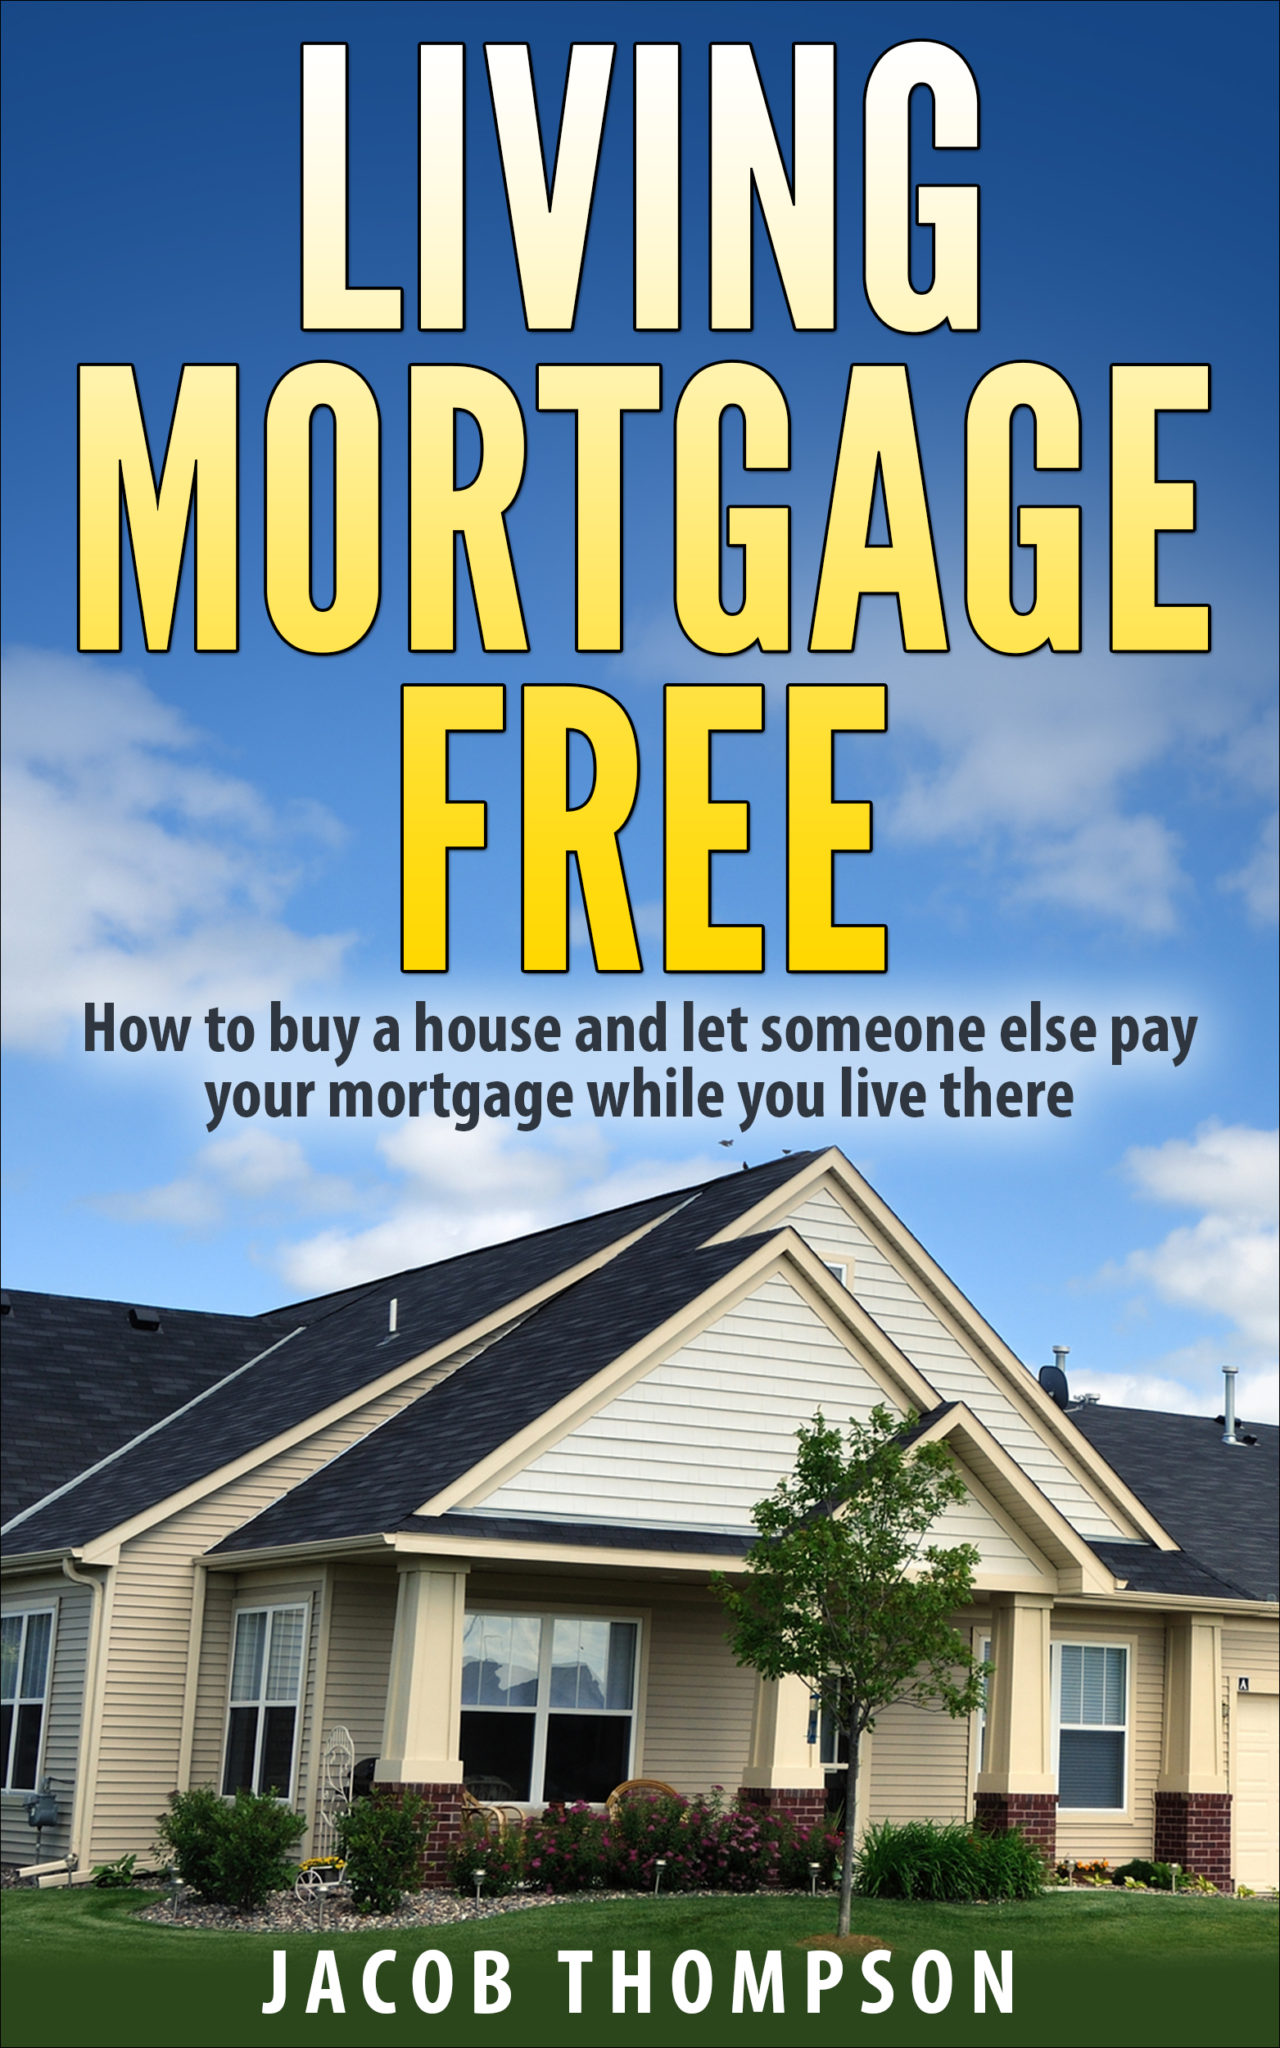 FREE: Living Mortgage Free: How to buy a house and let someone else pay your mortgage while you live there by Jacob Thompson